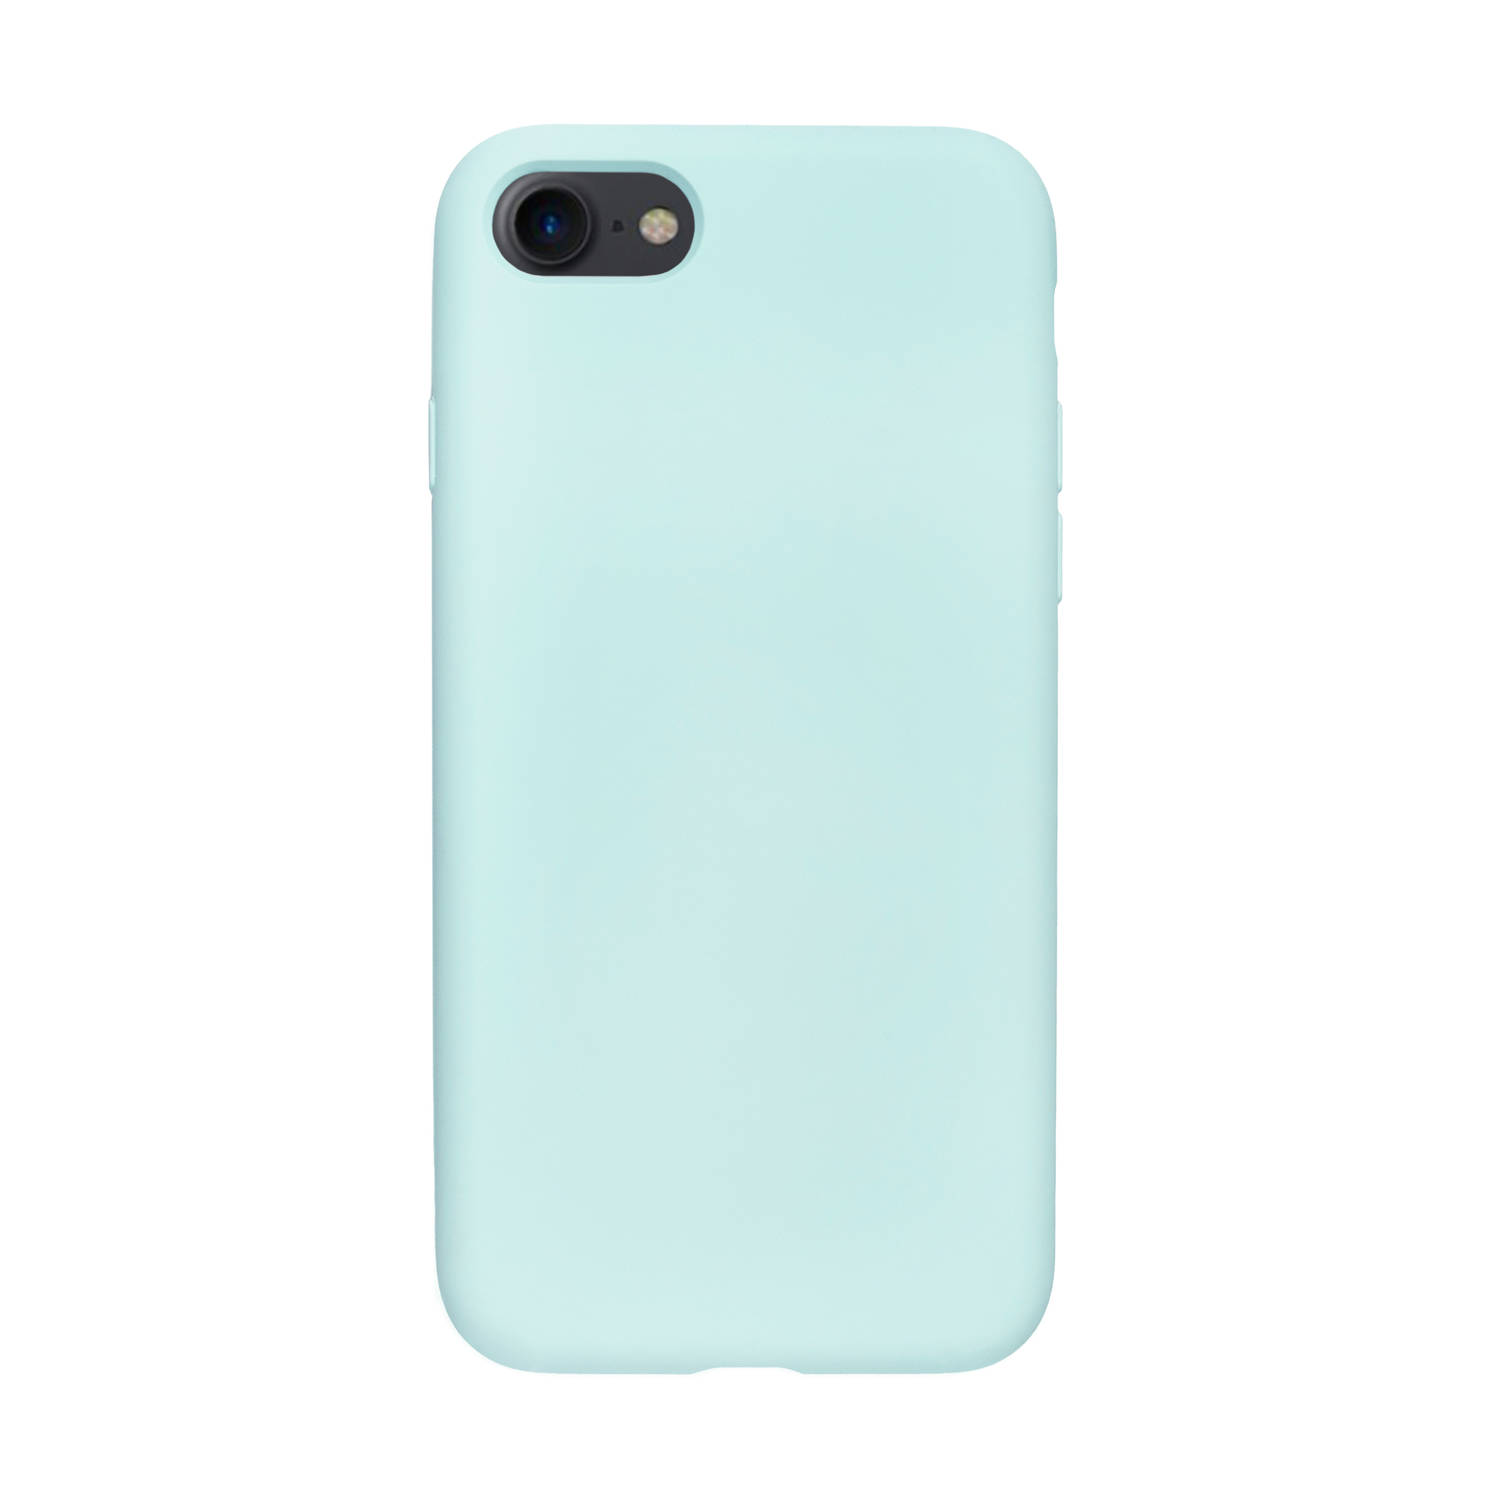 BMAX Liquid silicone case hoesje voor iPhone SE 2020 - Turquoise/Turquoise